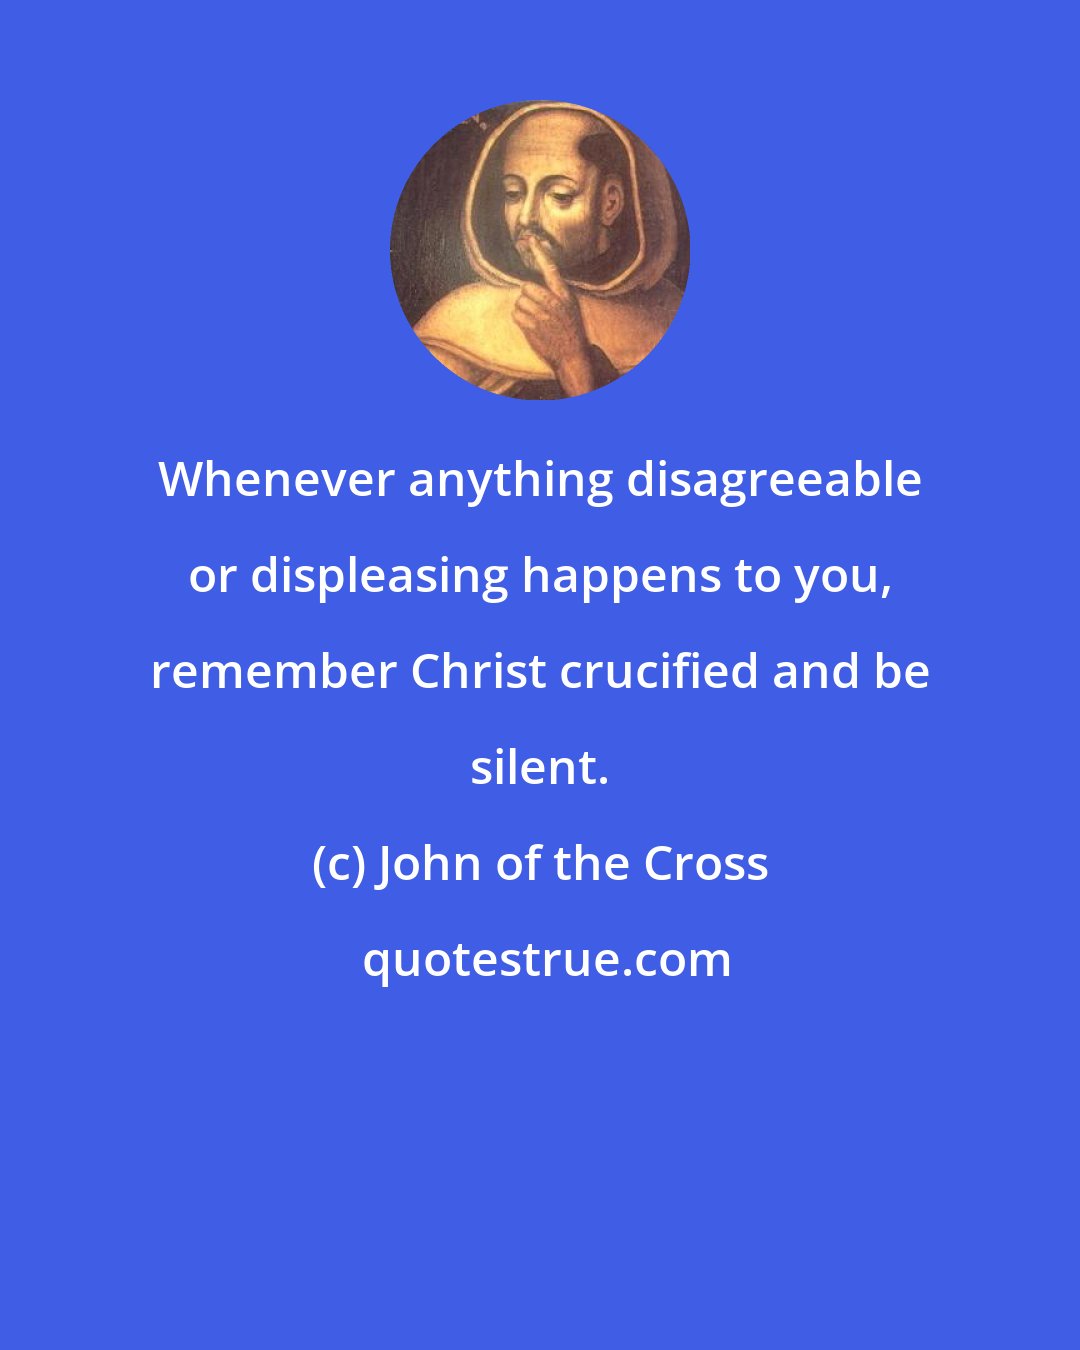 John of the Cross: Whenever anything disagreeable or displeasing happens to you, remember Christ crucified and be silent.